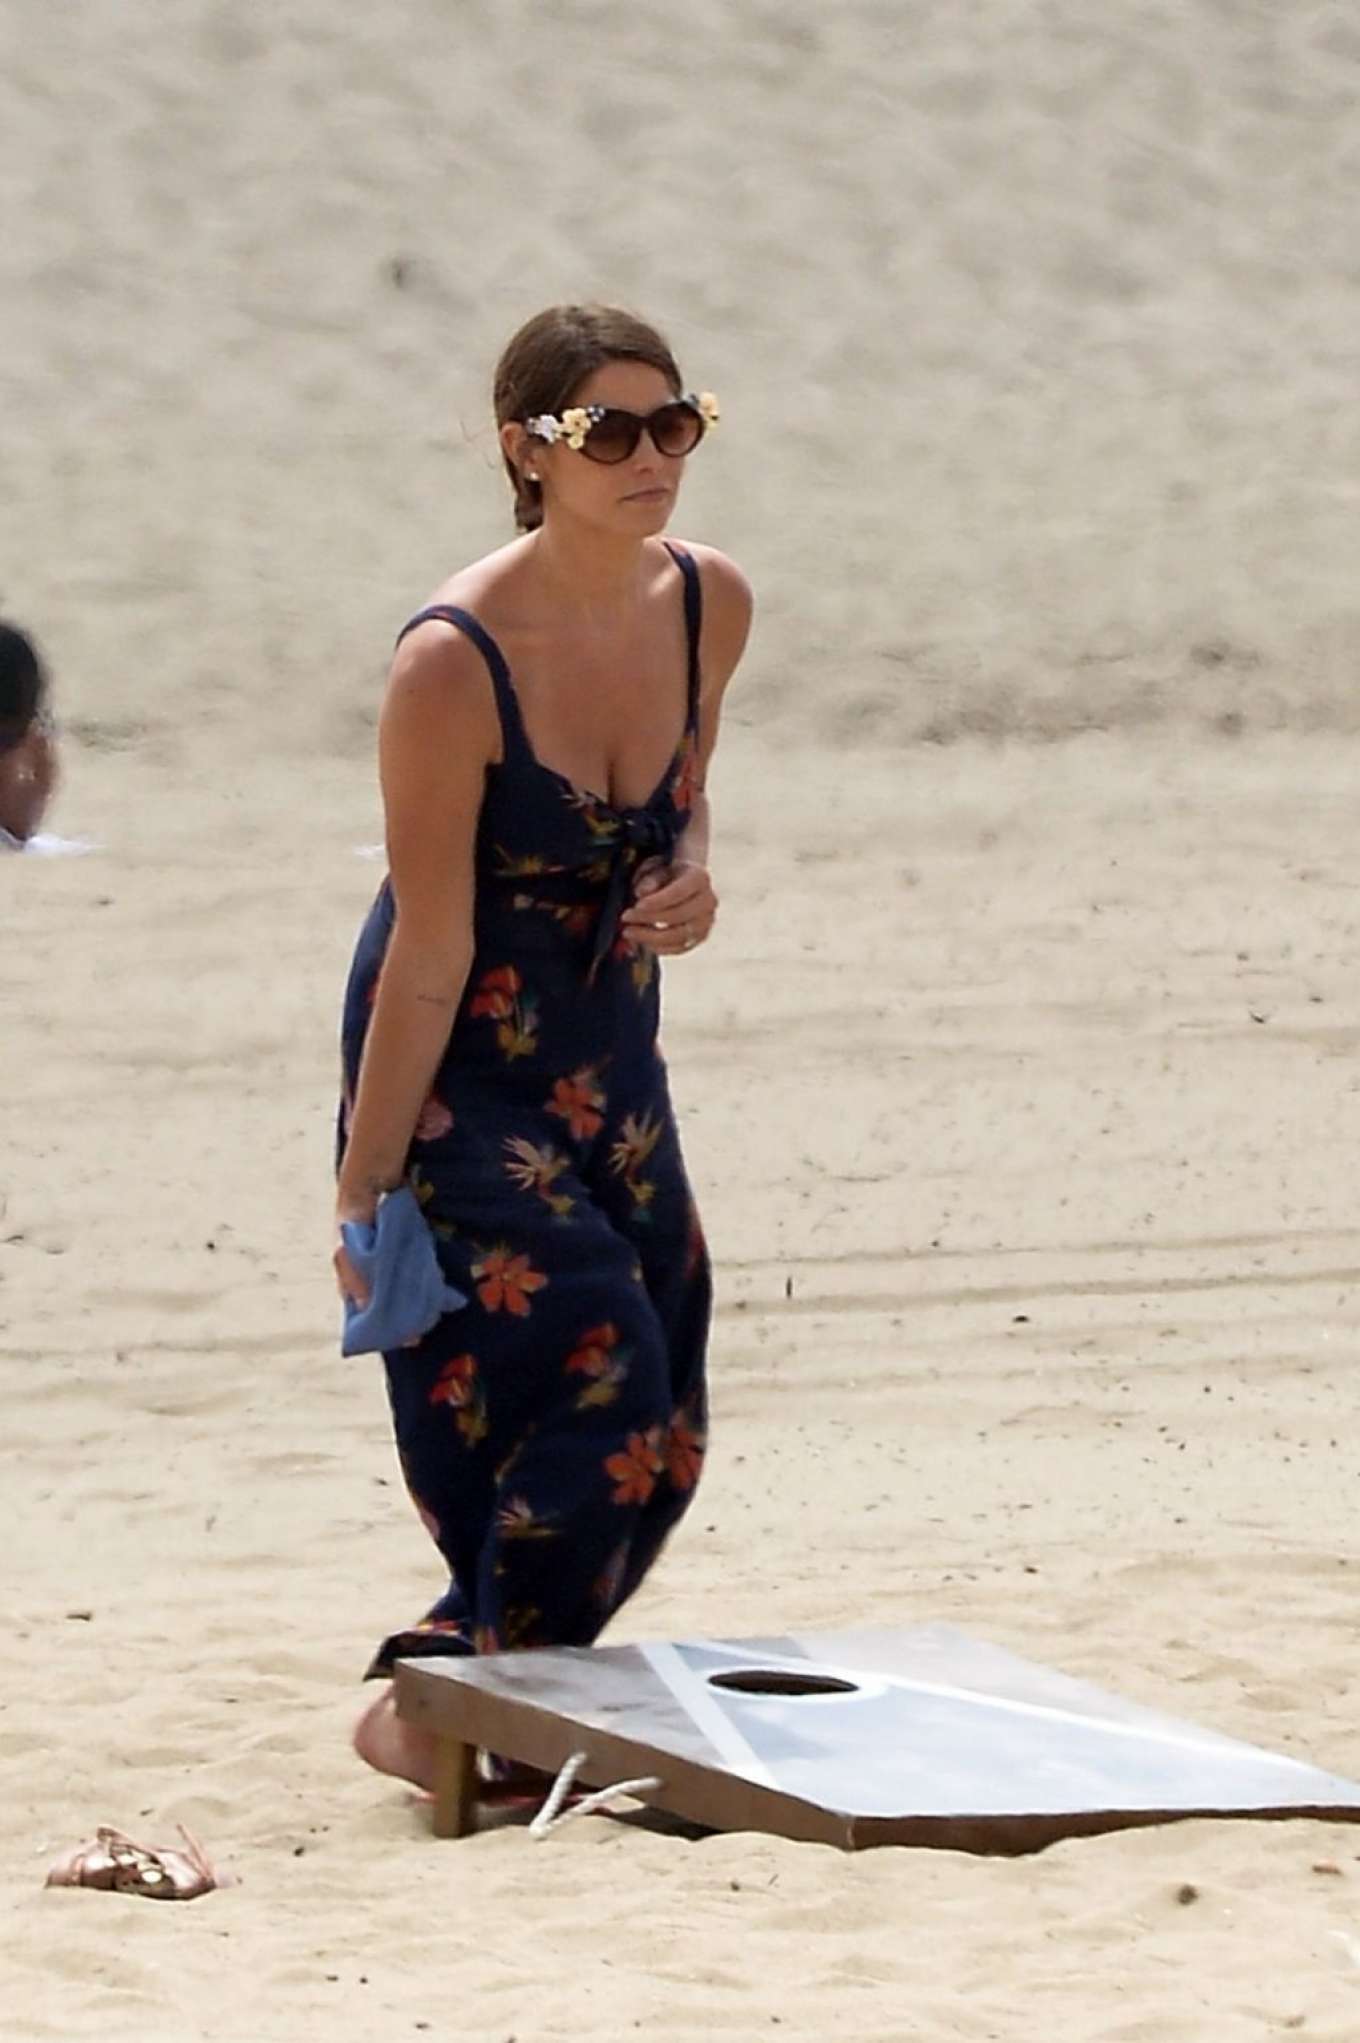 Ashley Greene at a beach party with friends in Los Angeles